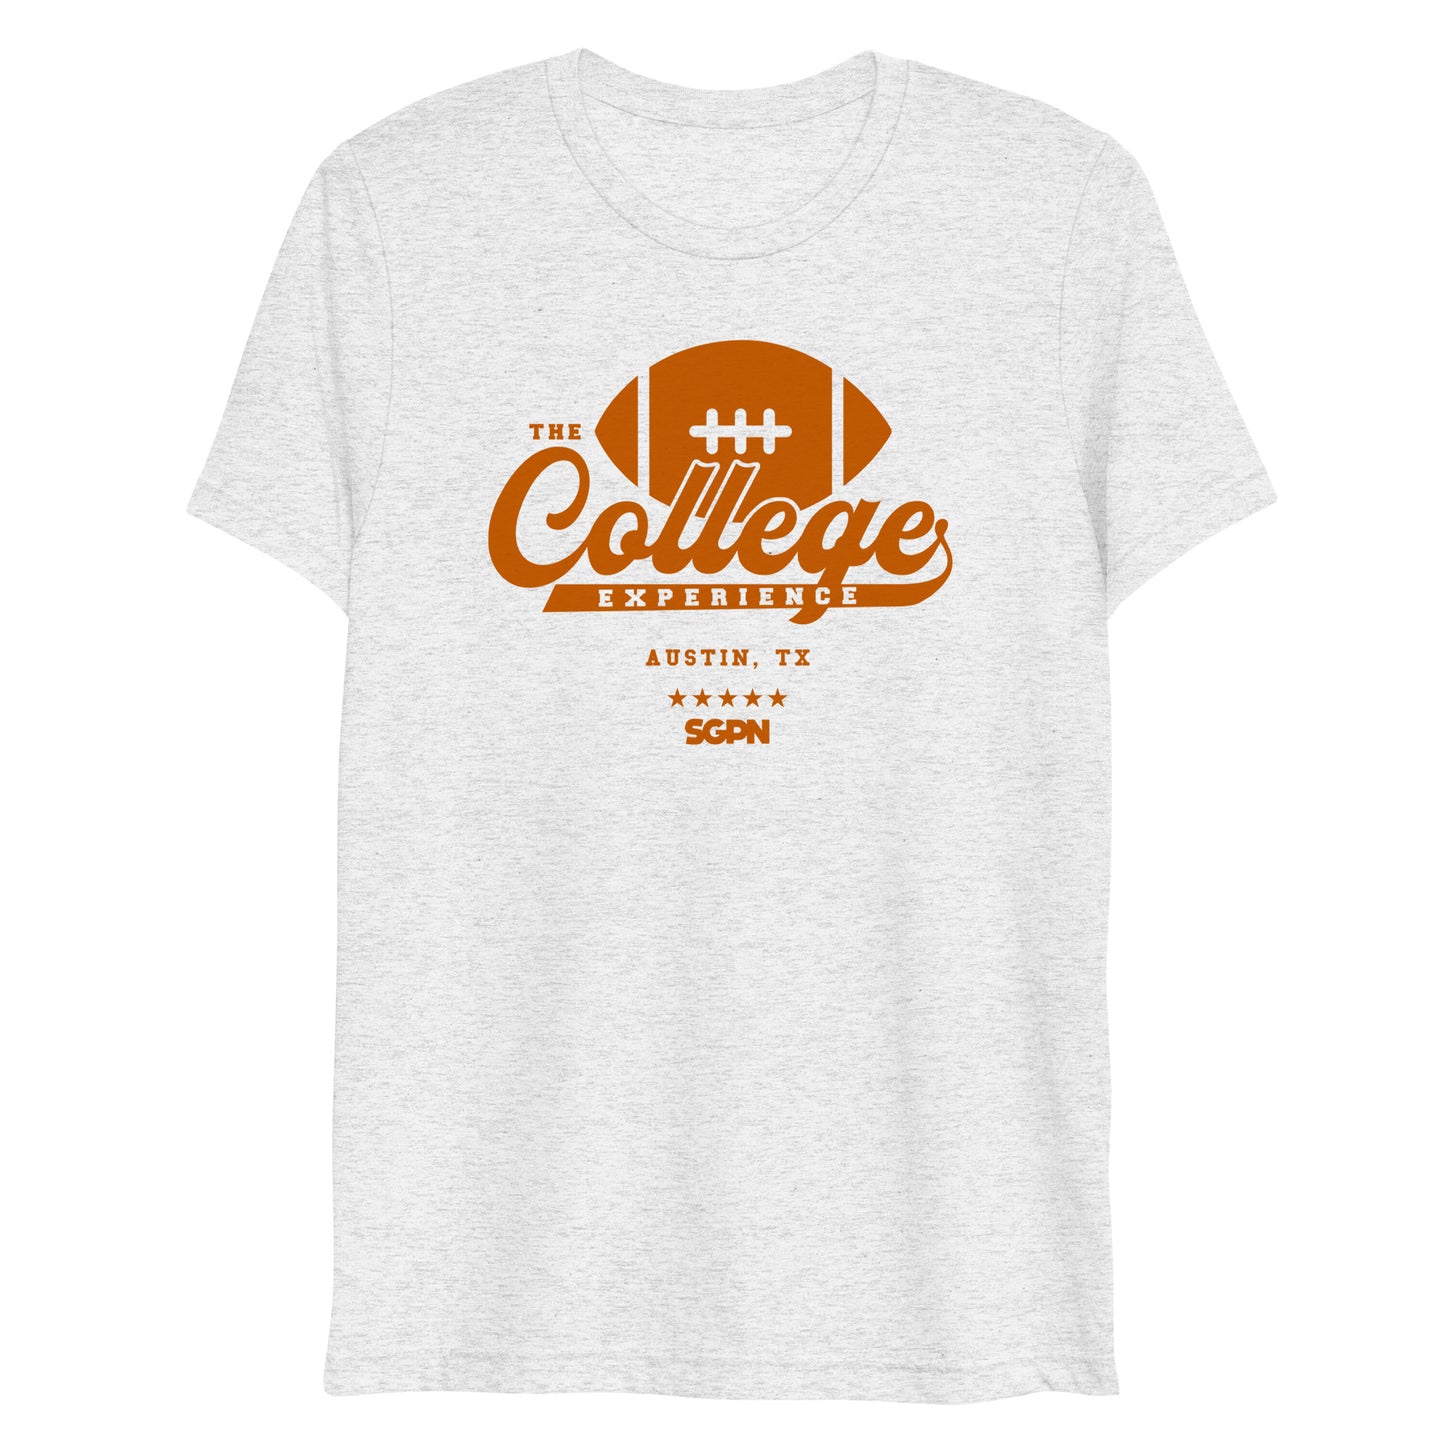 The College Football Experience - Austin edition - White Fleck Short sleeve t-shirt